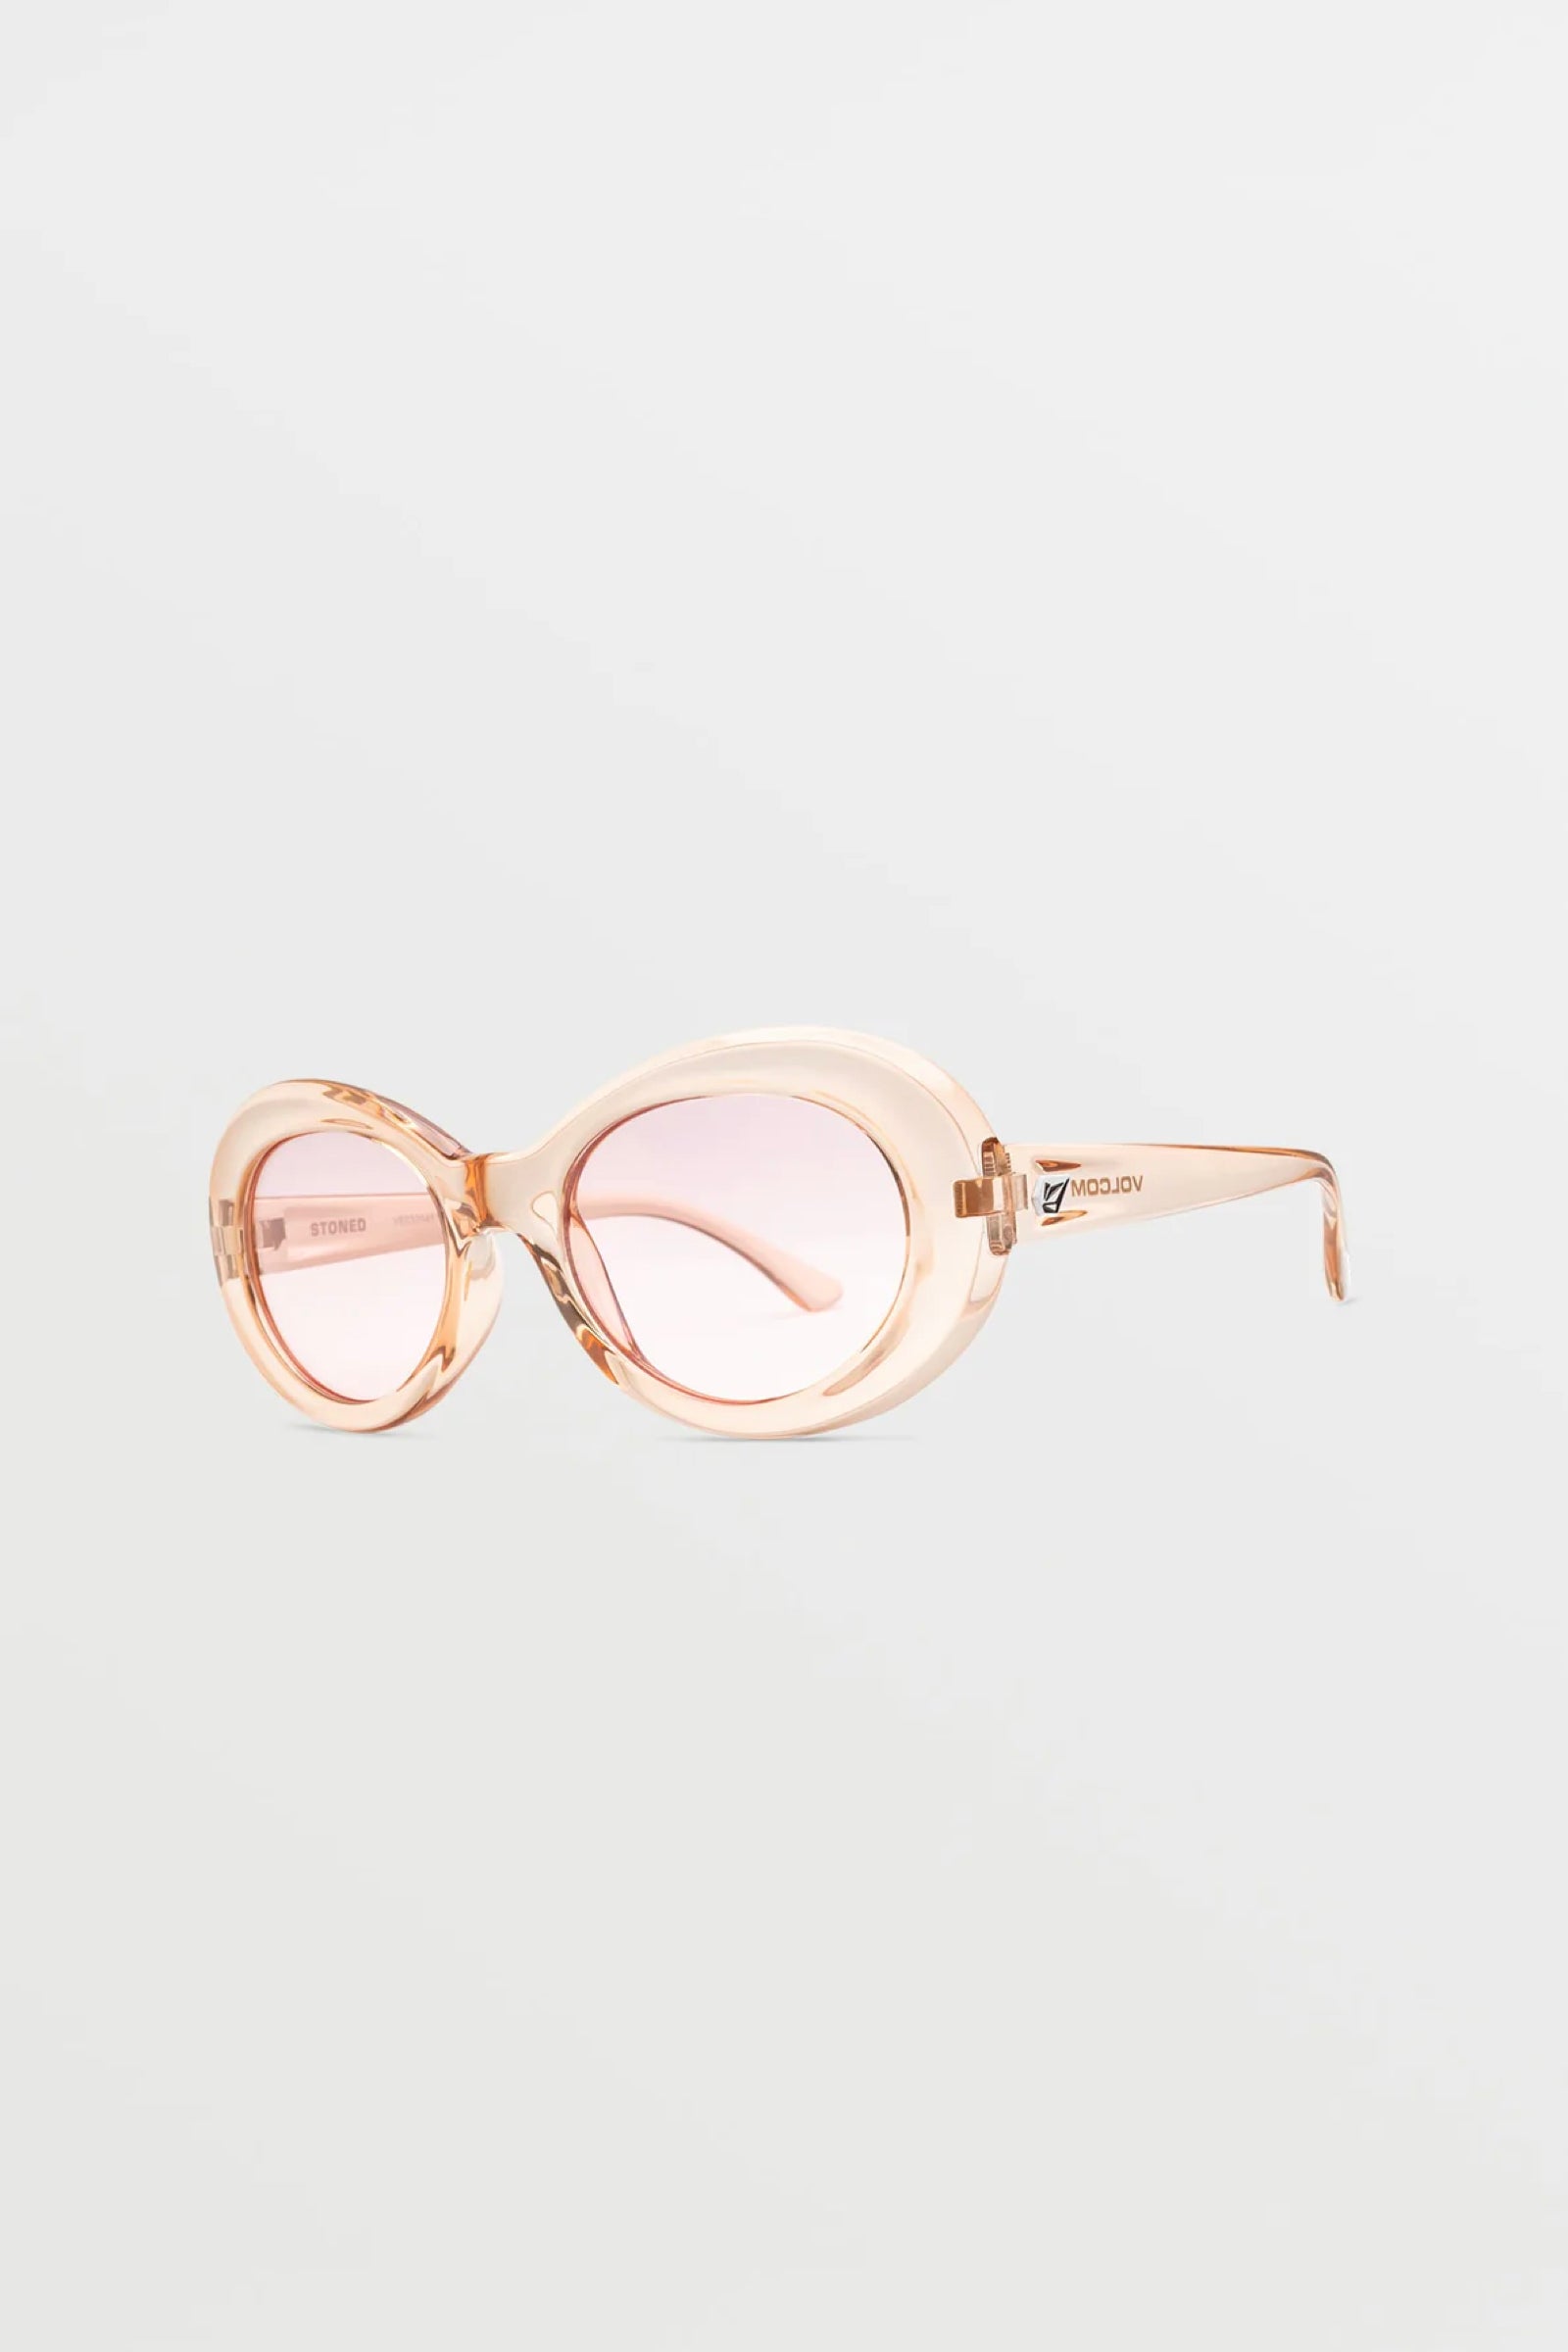 STONED SUNGLASSES - QUAIL FEATHER/PINK